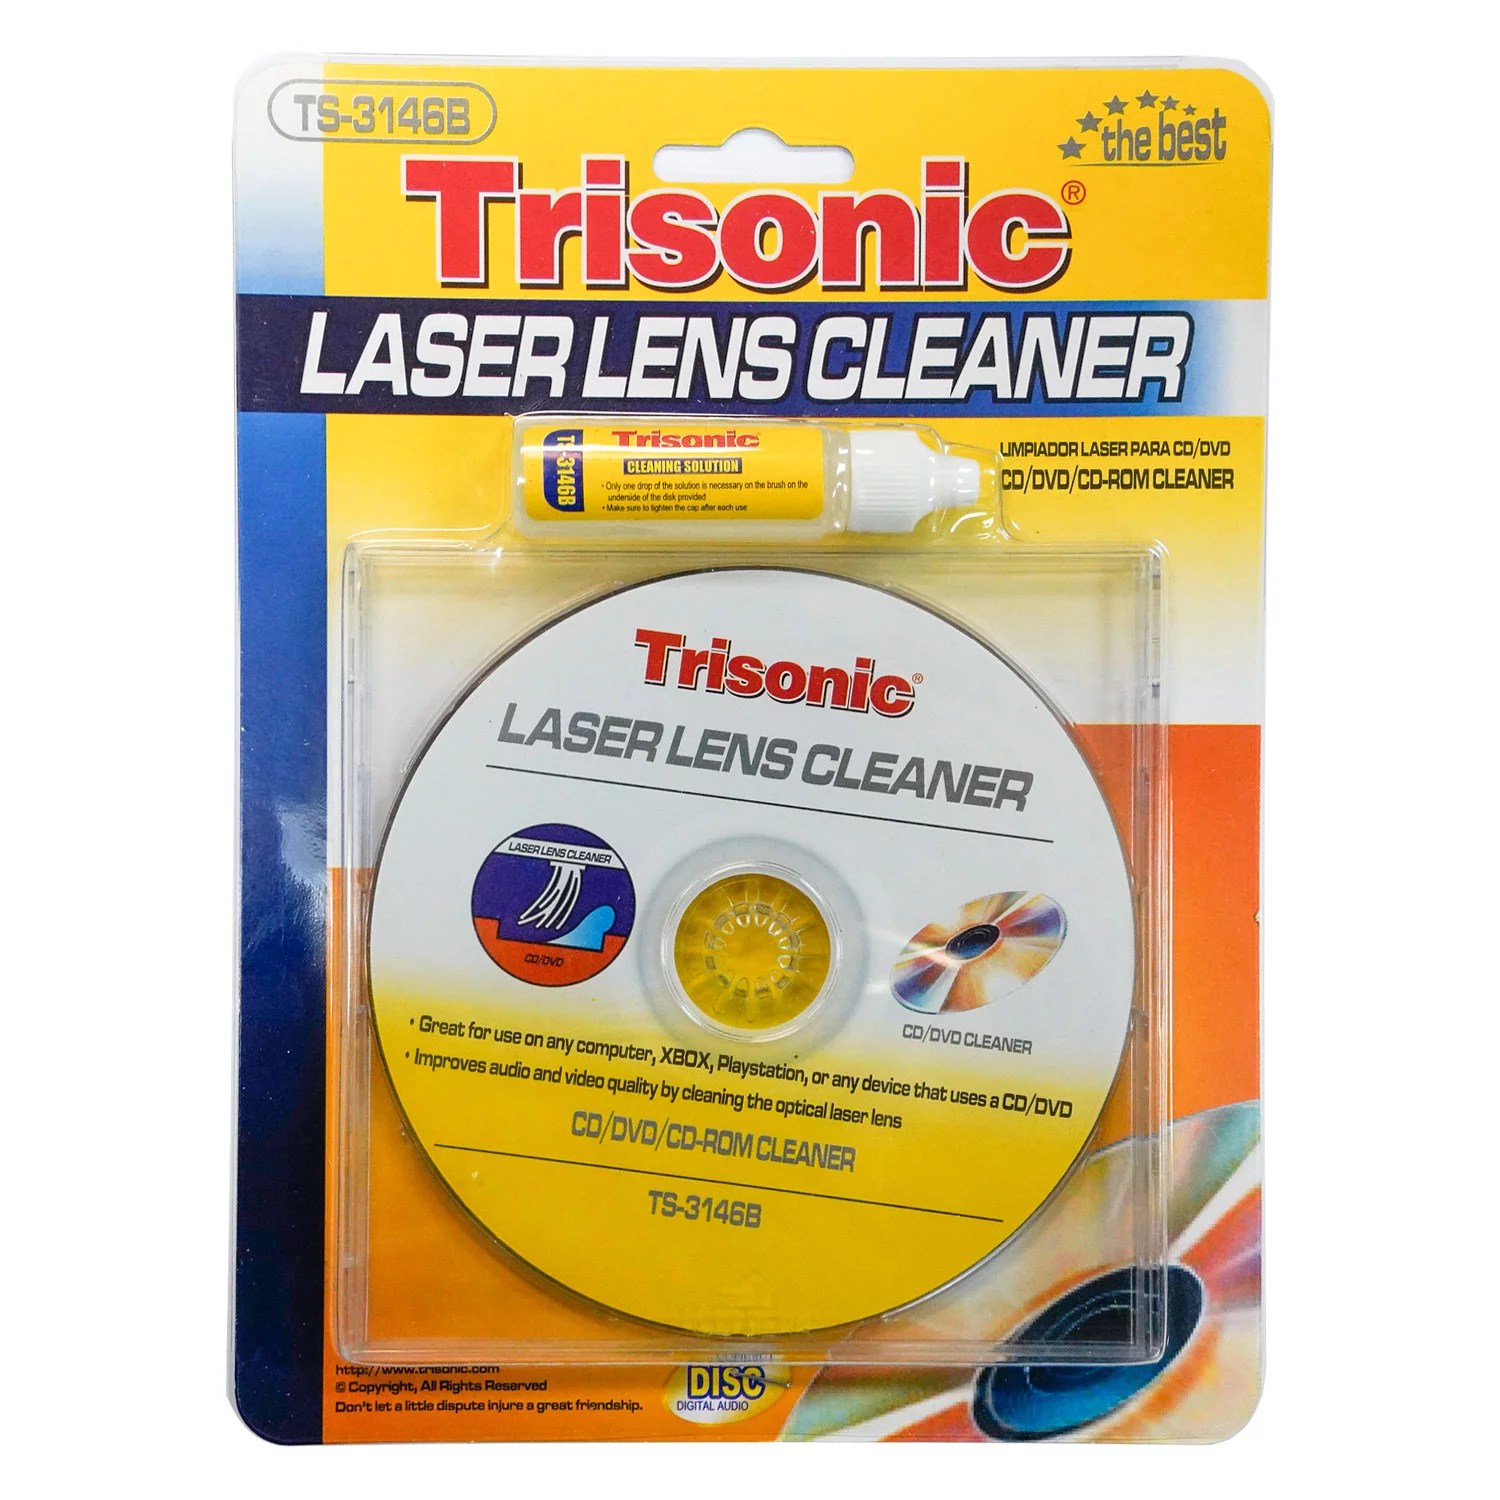 New Laser Lens Cleaner Game Console CdRom Dvd Player